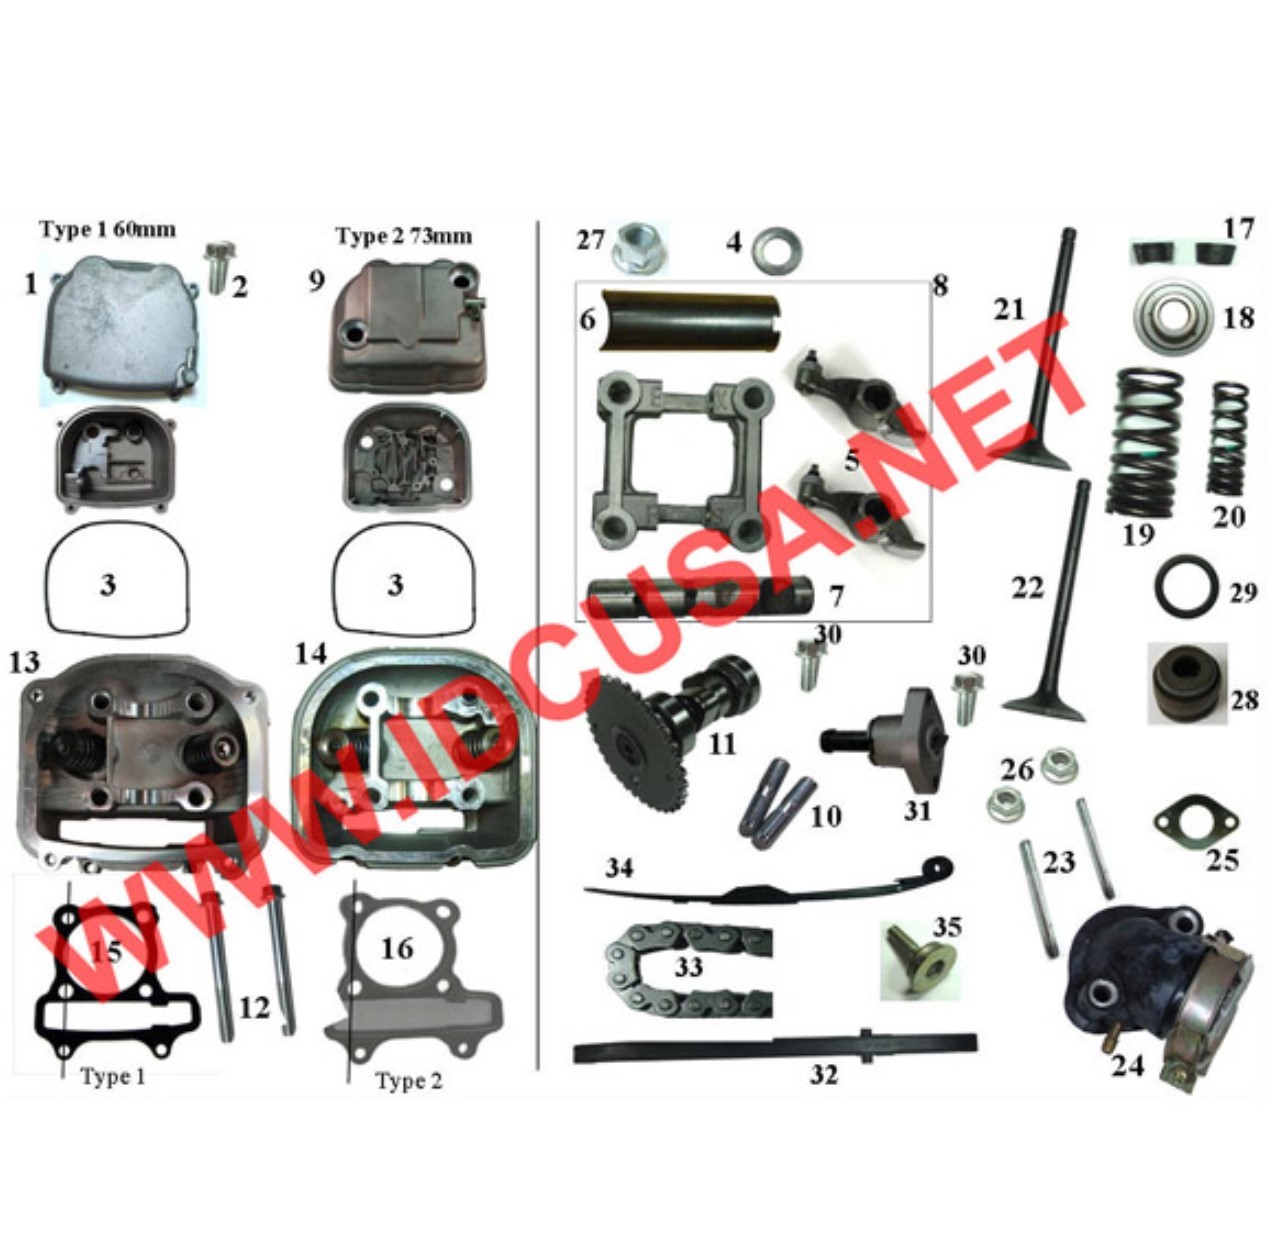 Cylinder Heads & Parts 2 Stroke and 4 Stroke For 49-260cc Engines